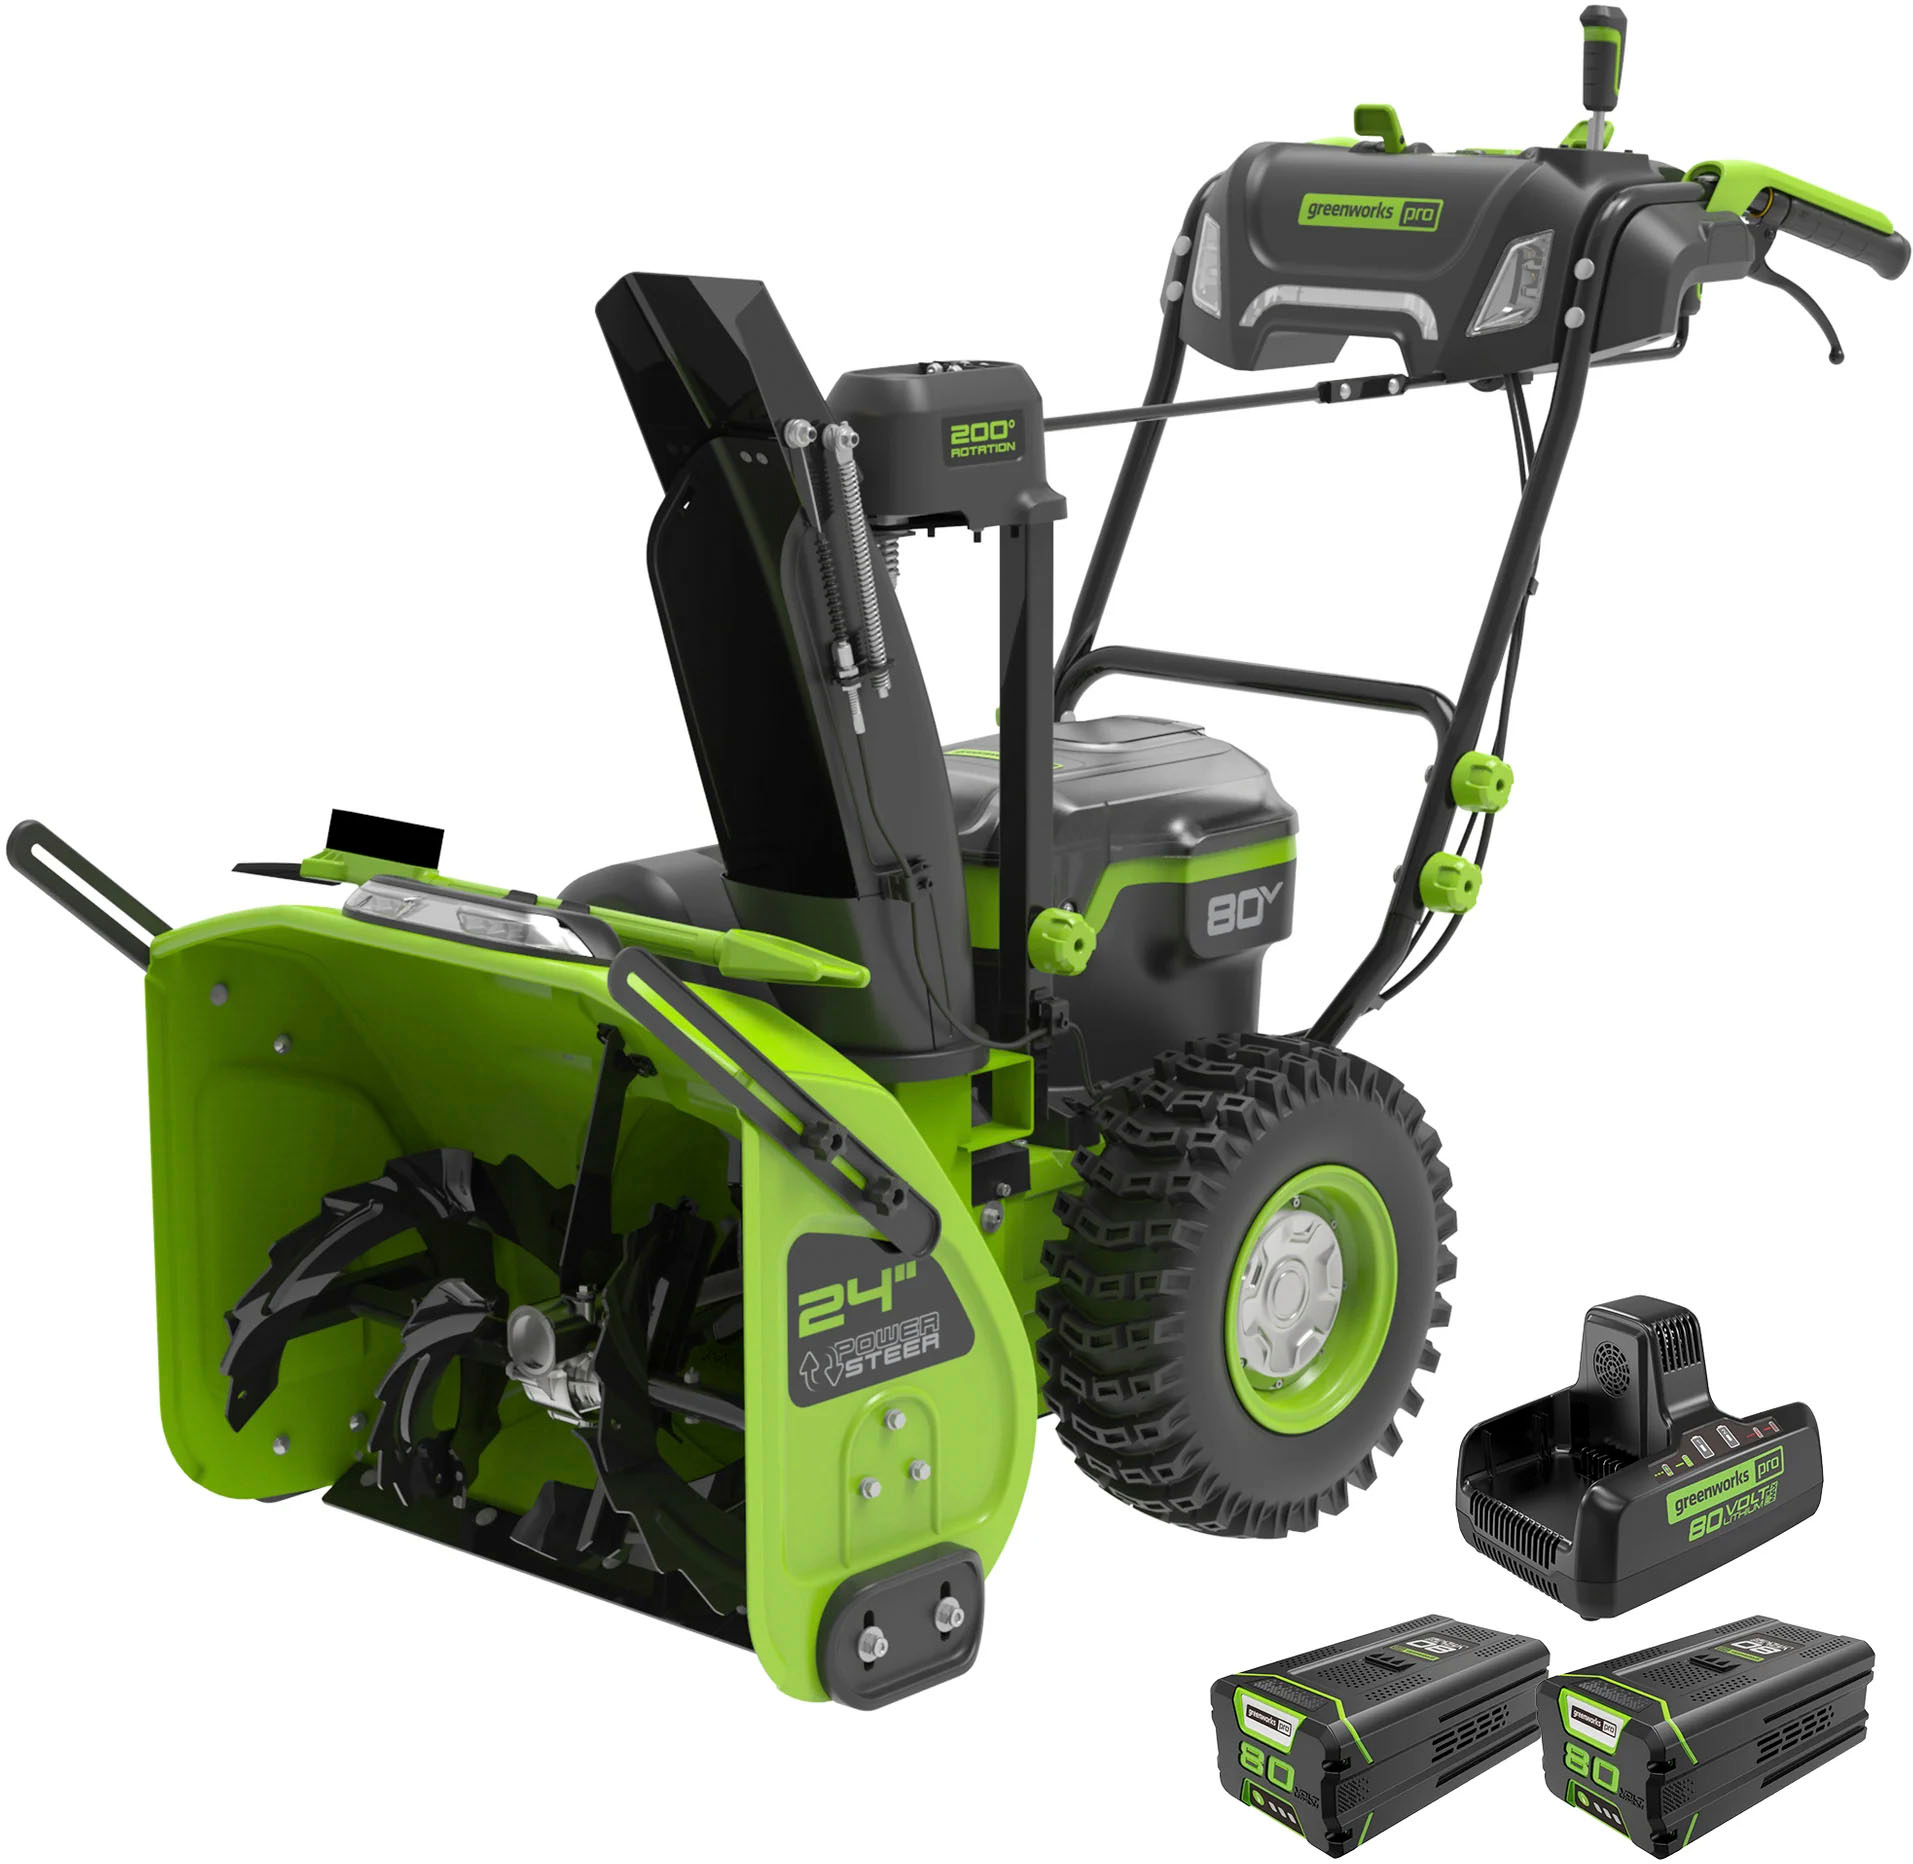 Greenworks 80V 24” Cordless Brushless Two-Stage Snow Blower with (2) 4.0  Batteries and Dual-Port Turbo Charger Green 2615702 - Best Buy